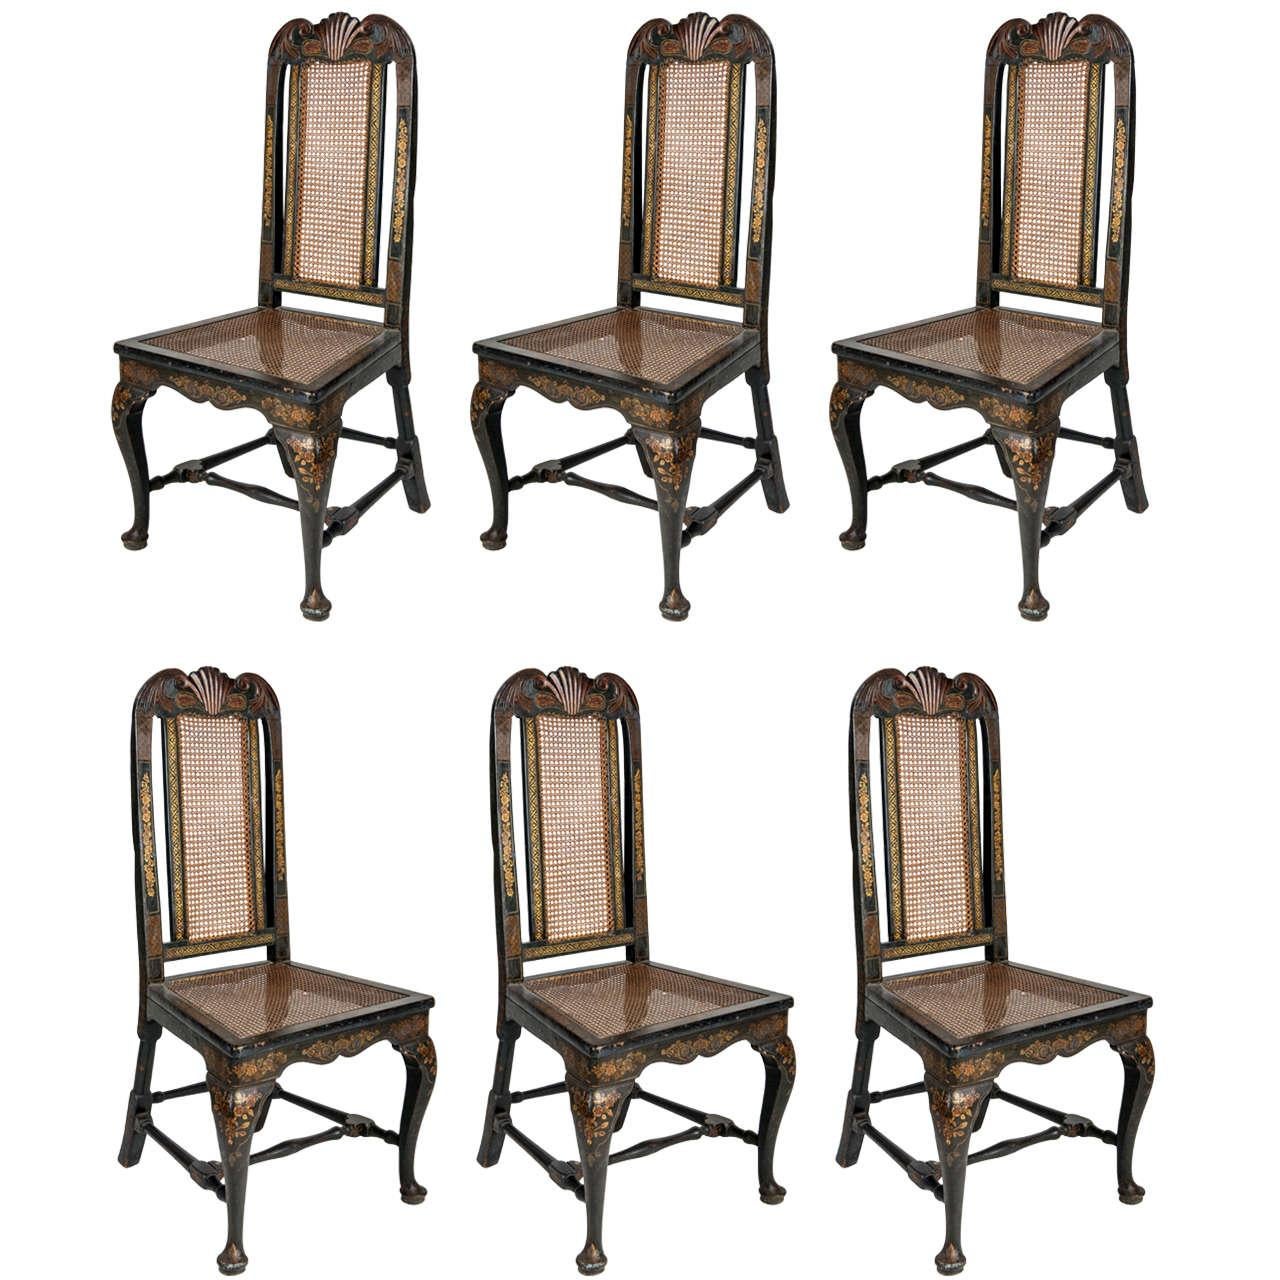 Fine Set of Six 18th Century Dining Room Chairs, England, 1750